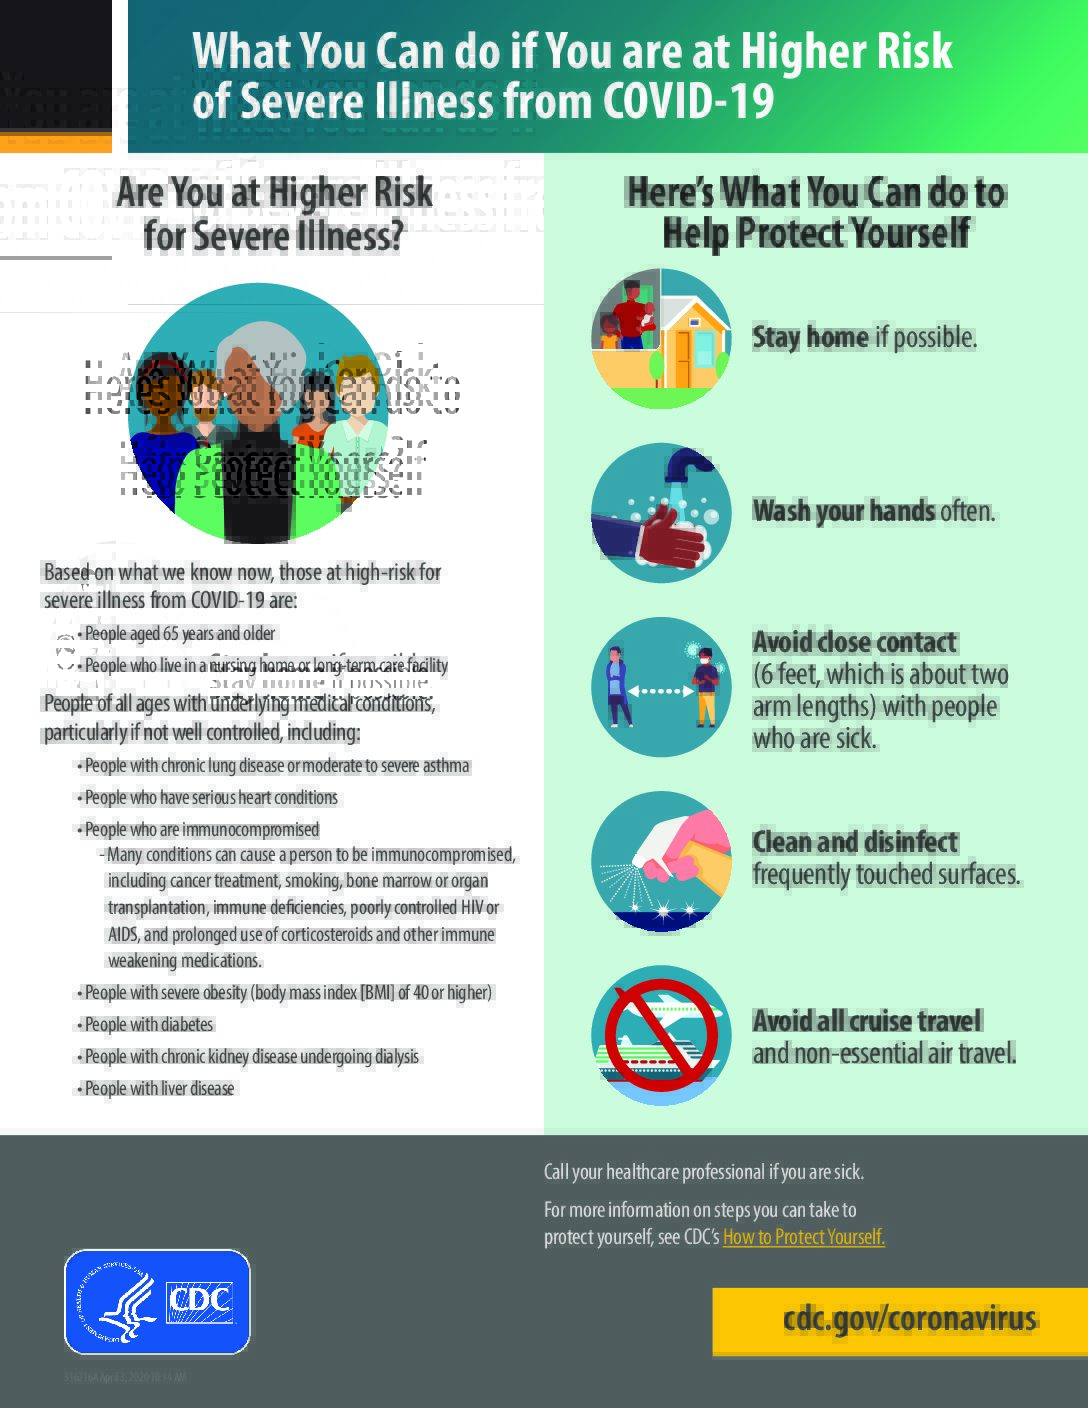 What You Can do if You are at Higher Risk of Severe Illness from COVID-19